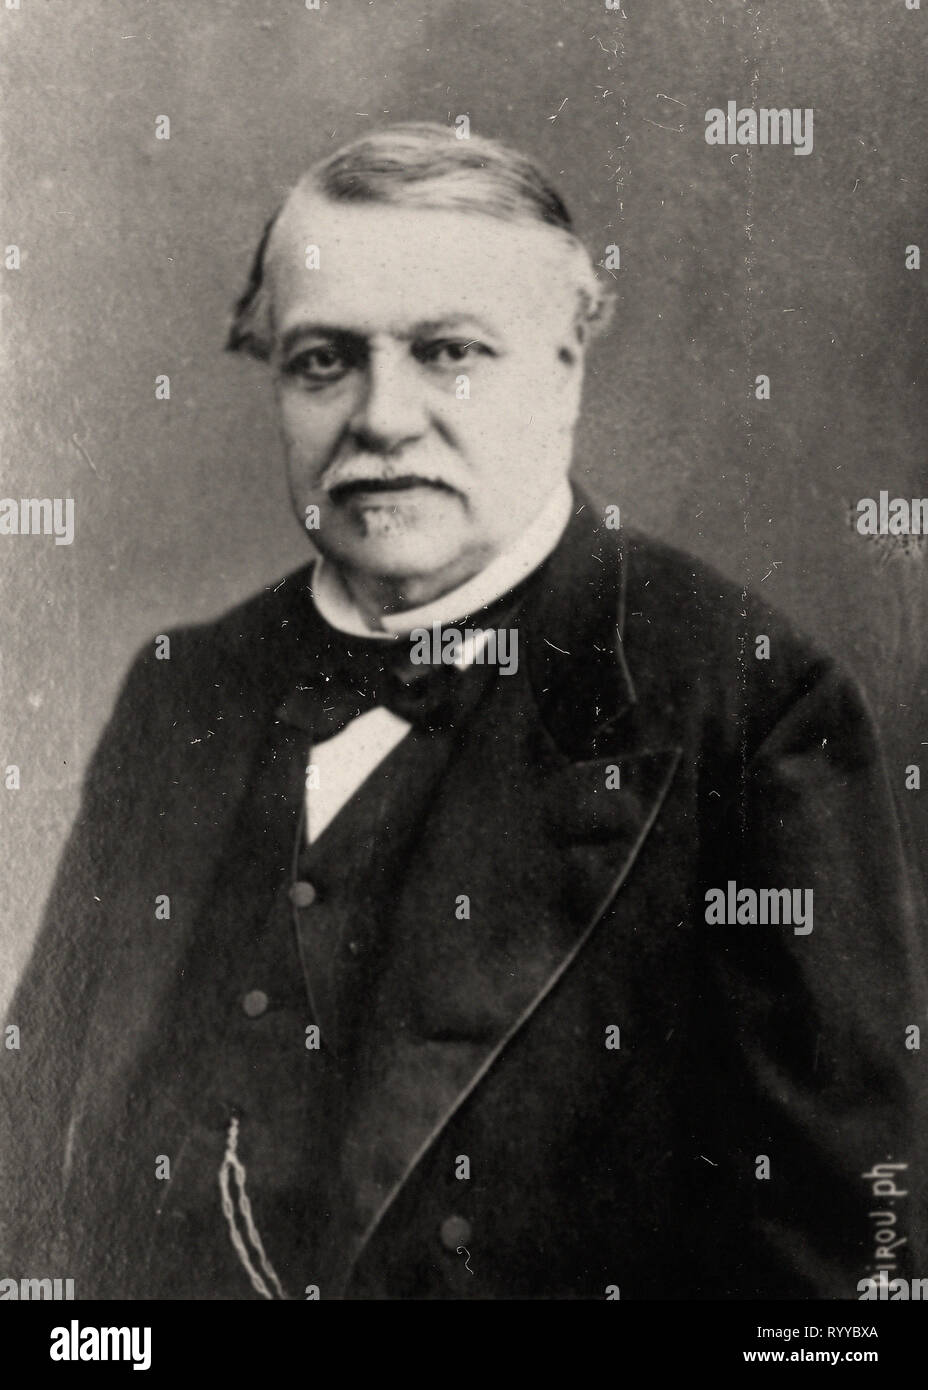 Photographic Portrait Of Say   From Collection Félix Potin, Early 20th Century Stock Photo